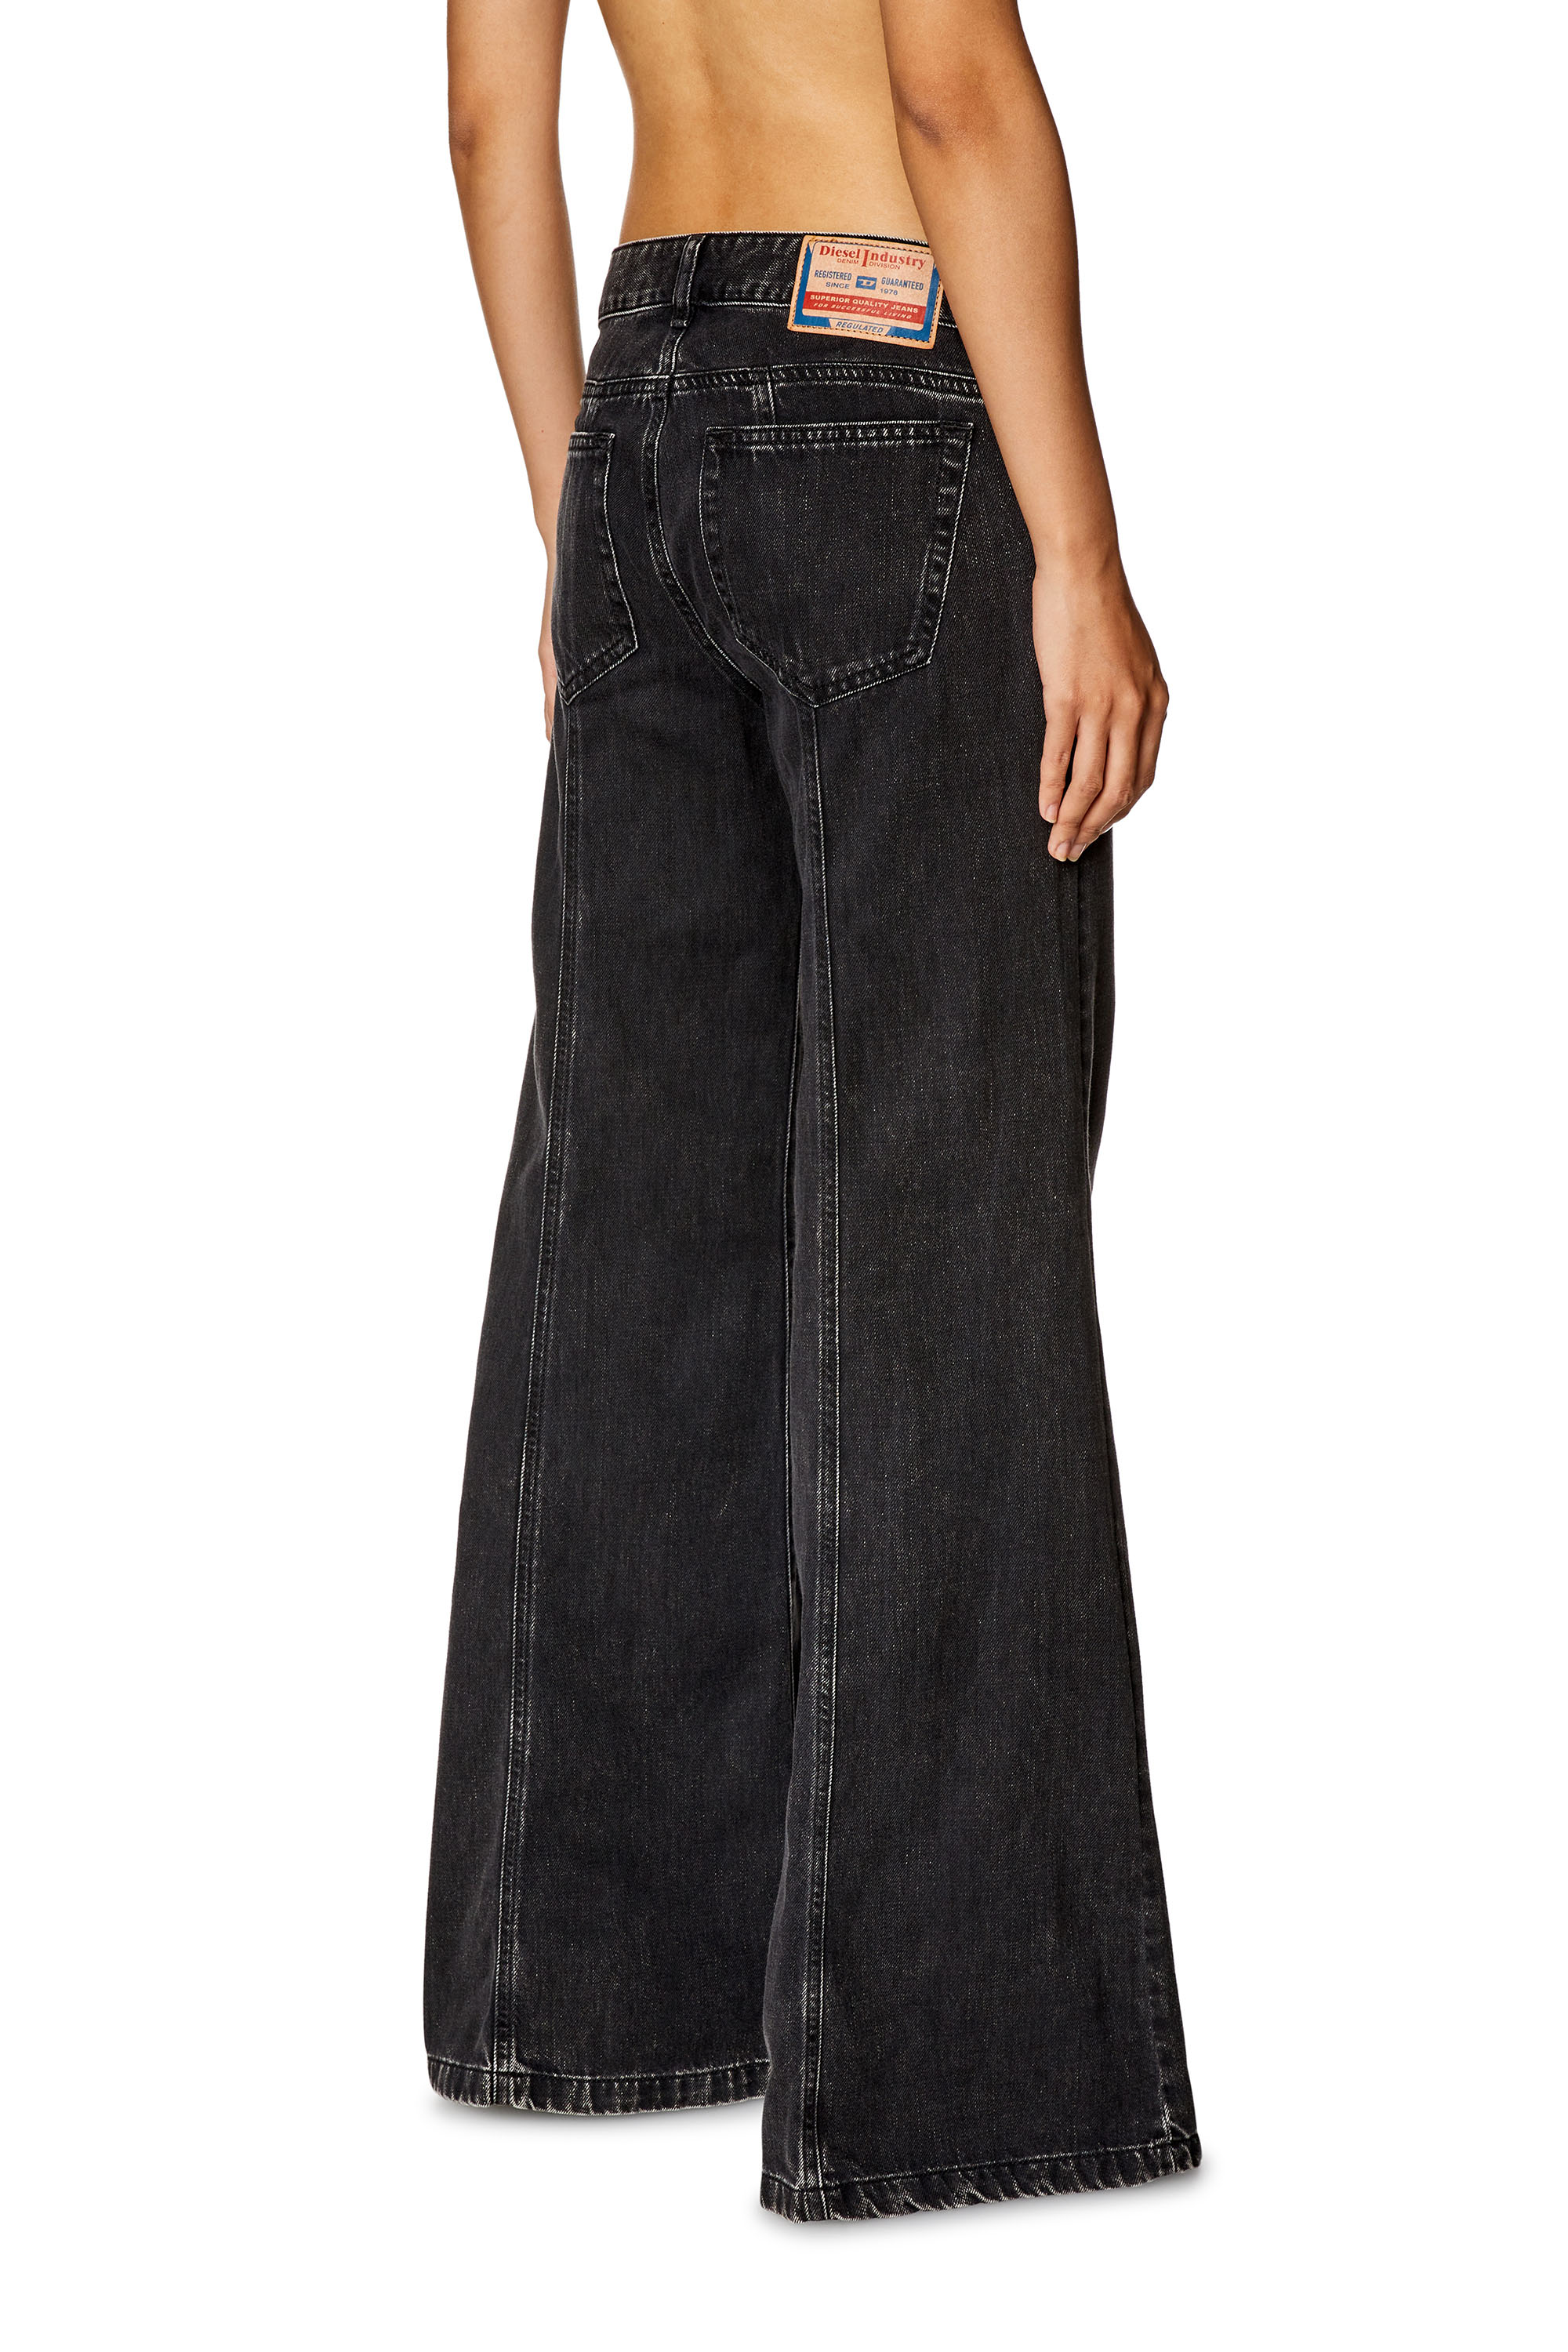 Diesel - Bootcut and Flare Jeans D-Akii 068HN, Mujer Bootcut y Flare Jeans - D-Akii in Negro - Image 3